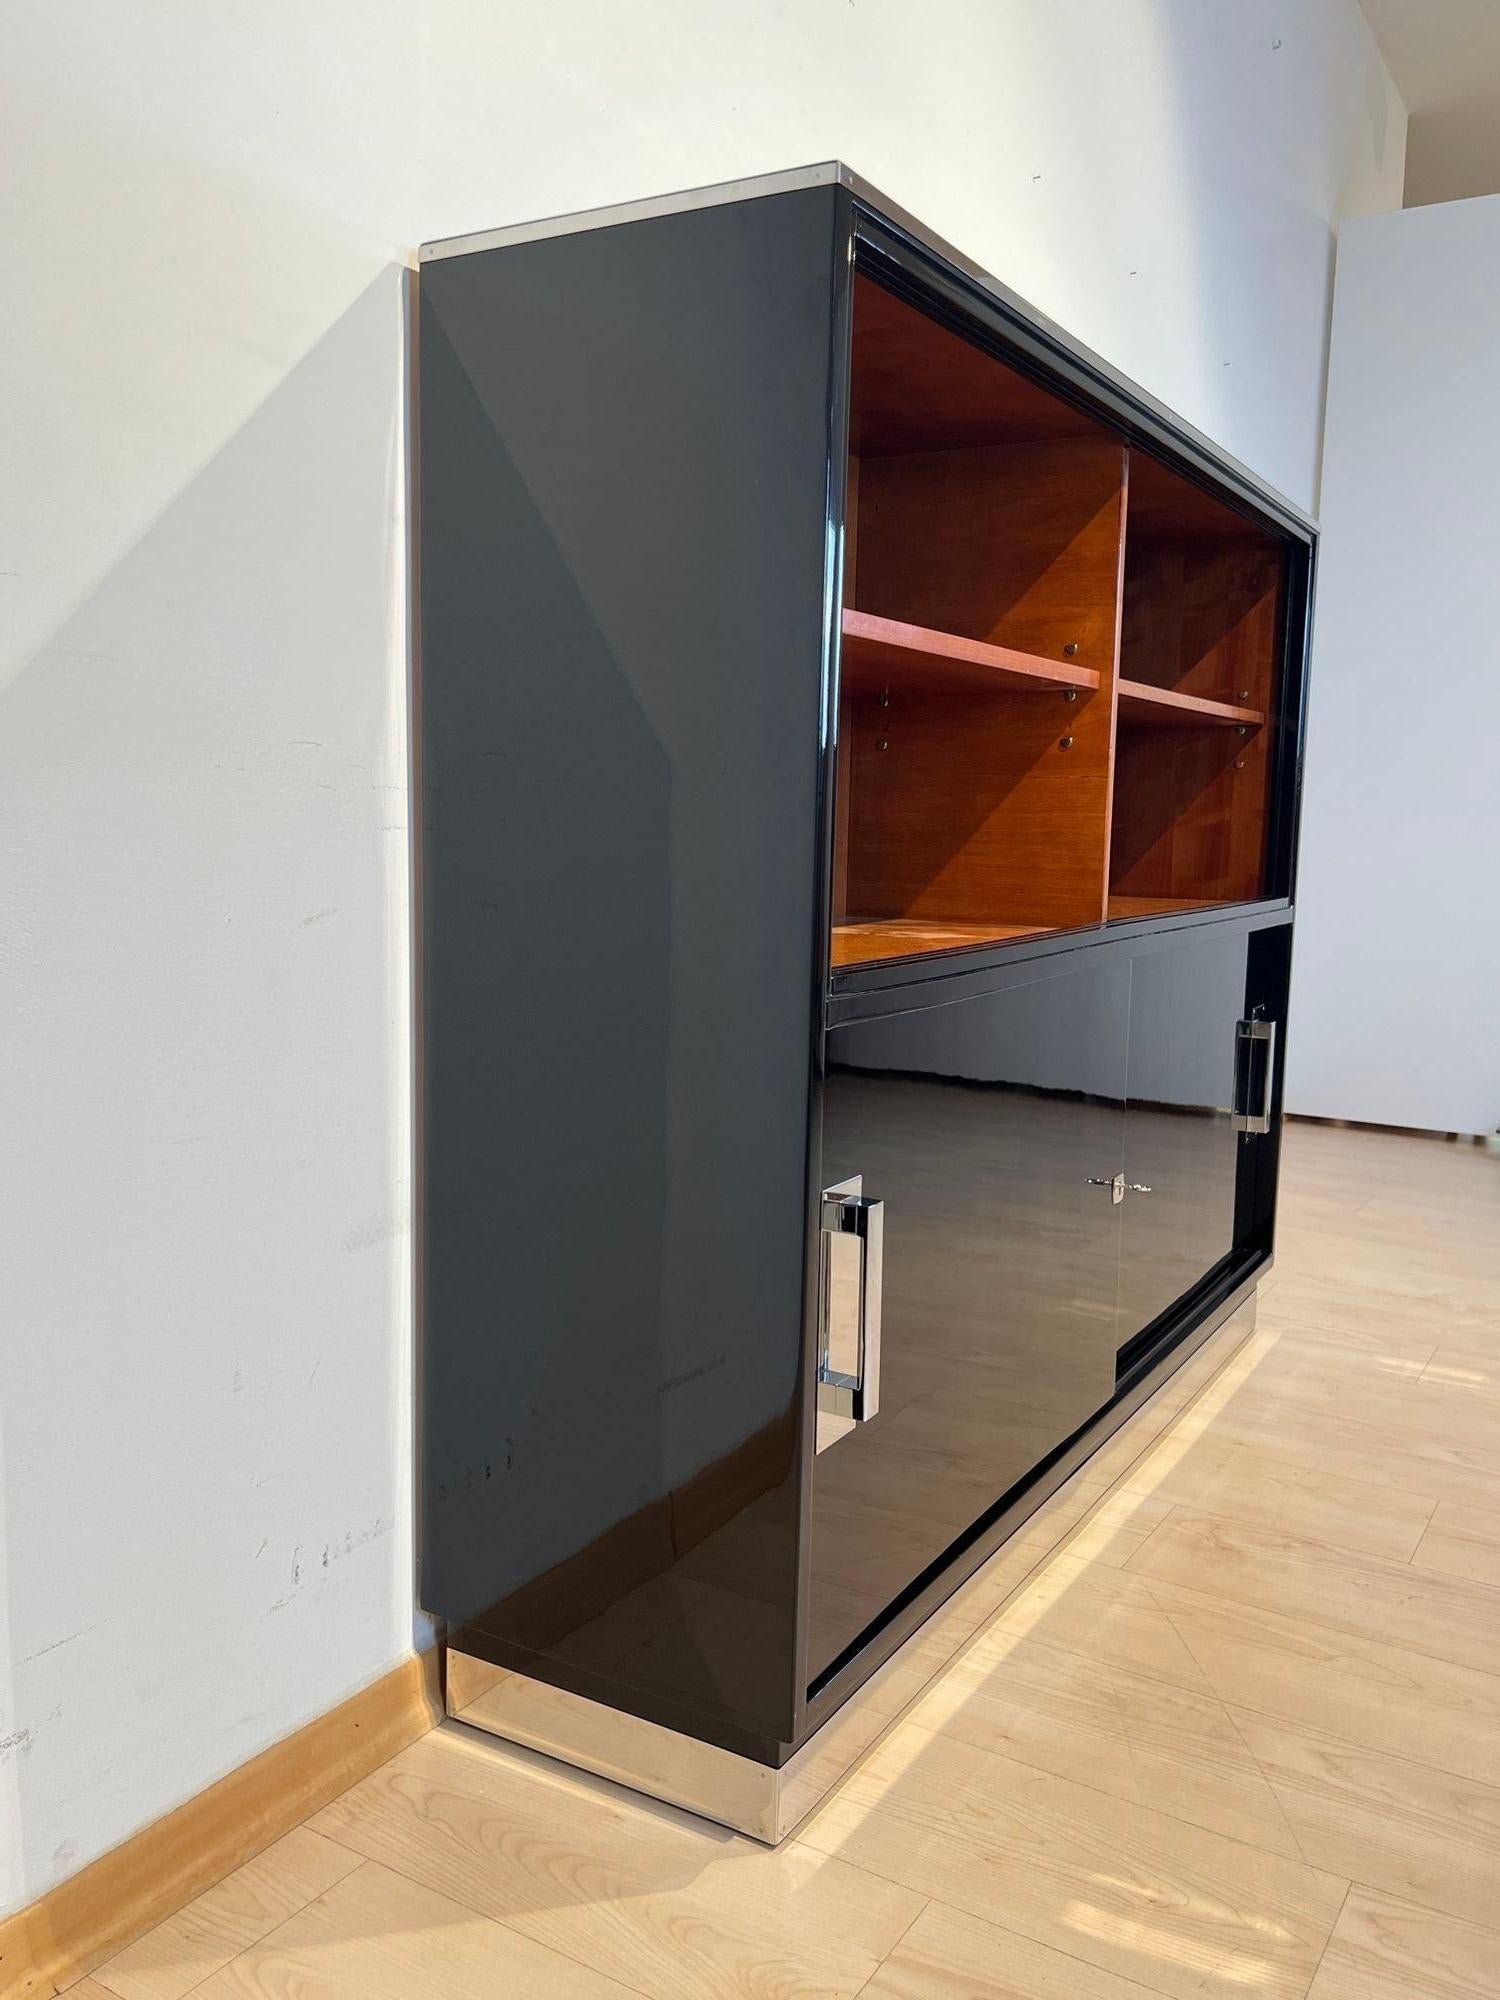 Bauhaus Office Cabinet, Black Lacquer, Mahogany, Germany circa 1930 In Good Condition For Sale In Regensburg, DE